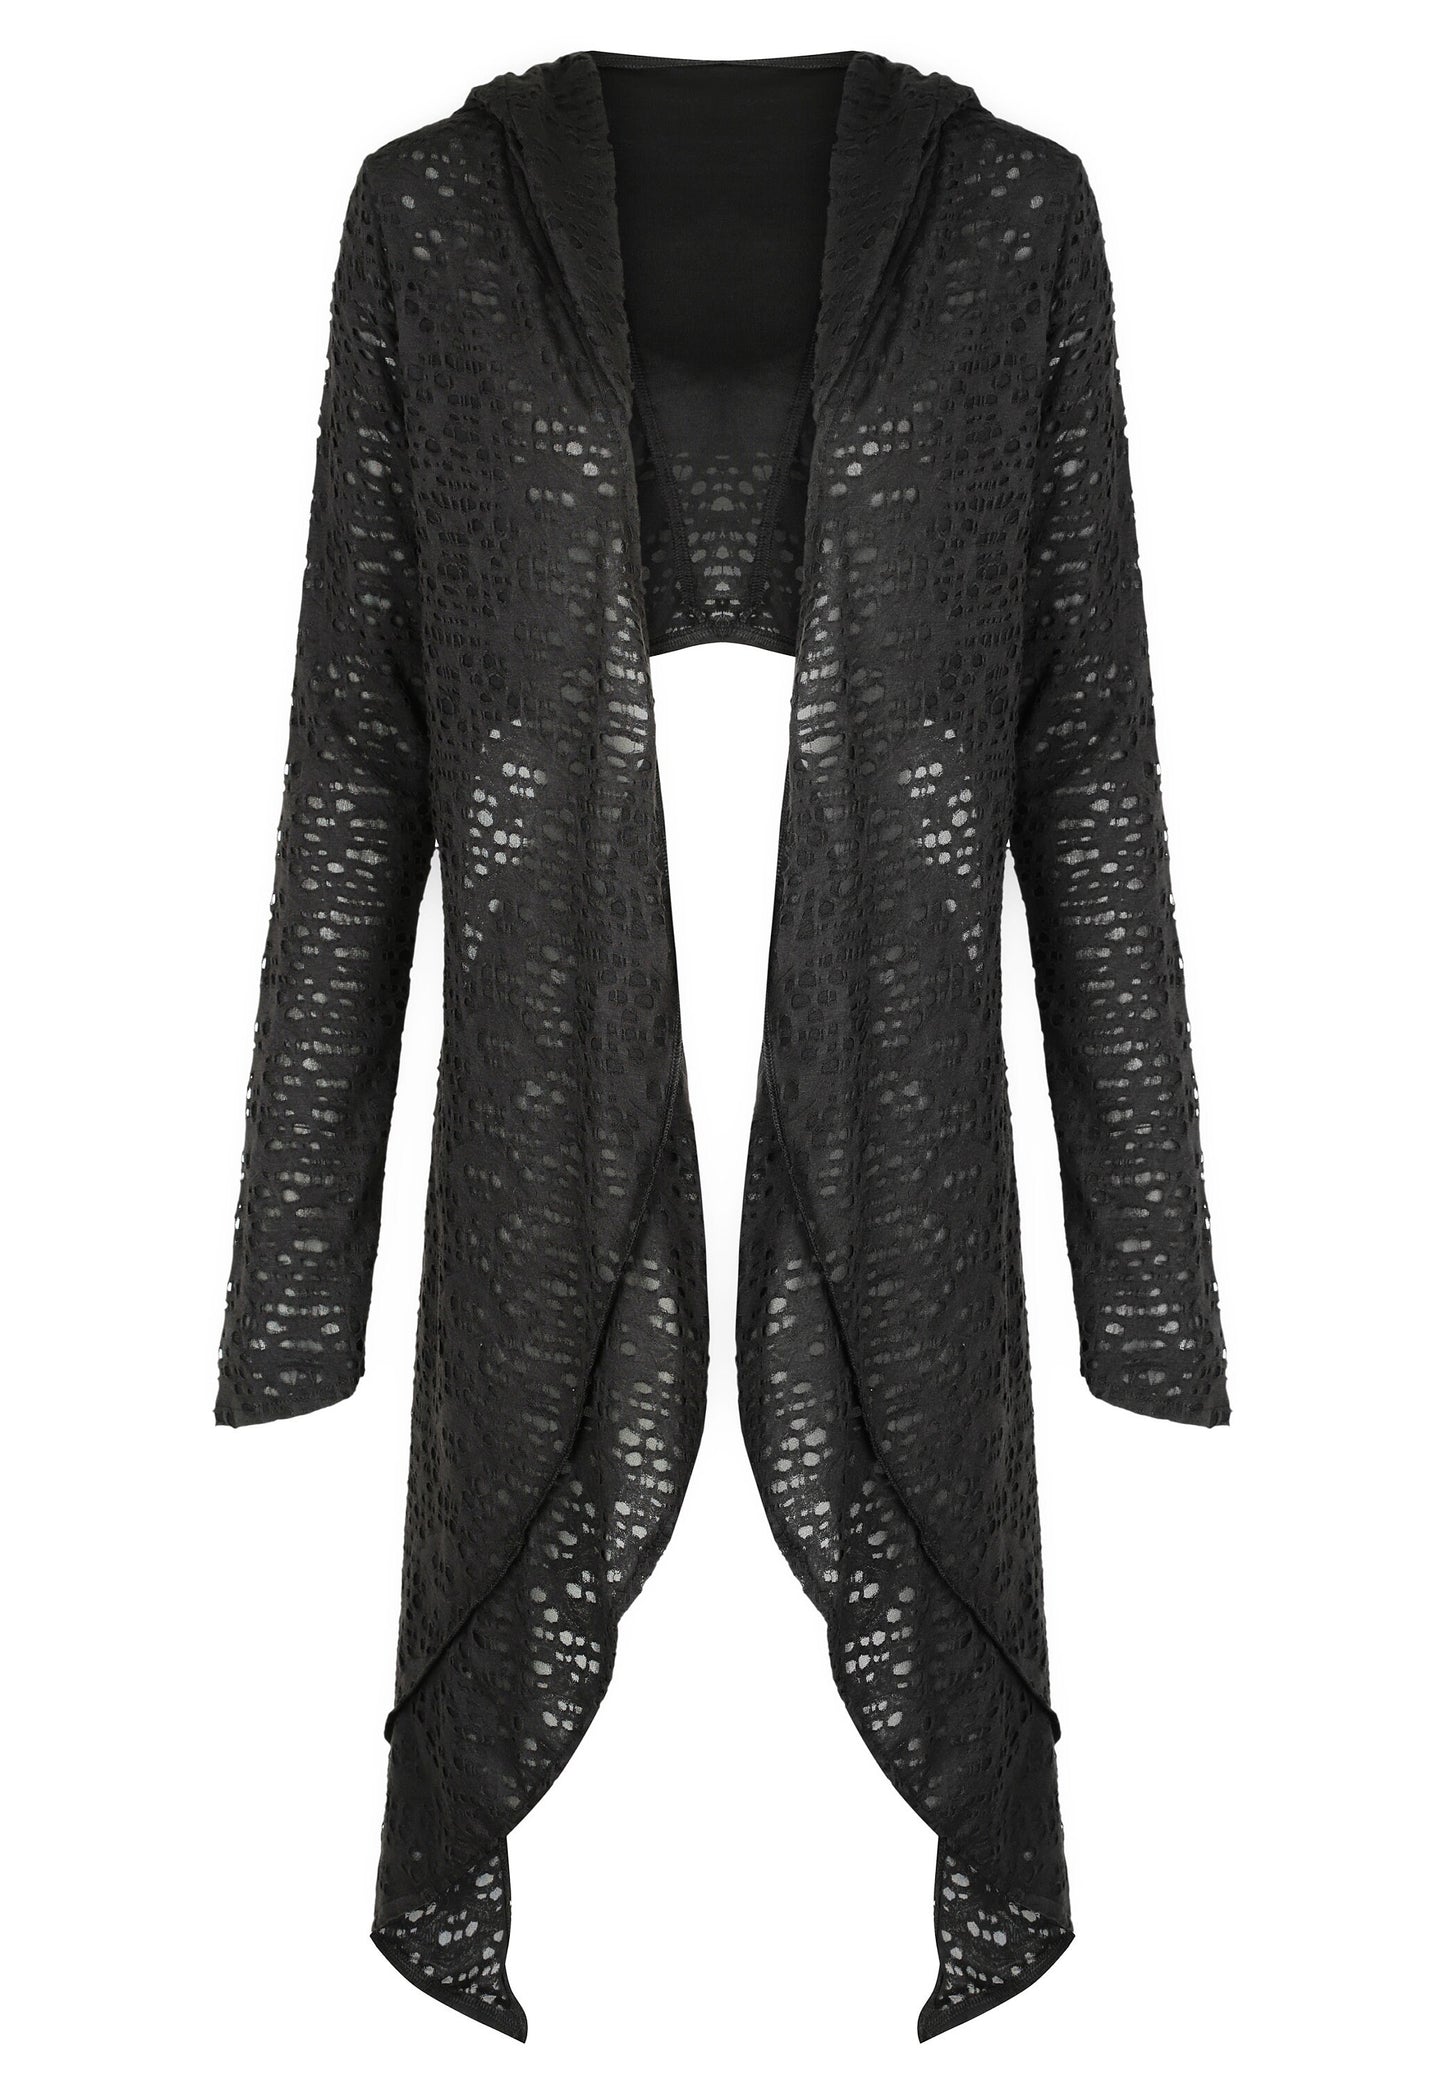 Black Distressed Hooded Cardigan Long Front